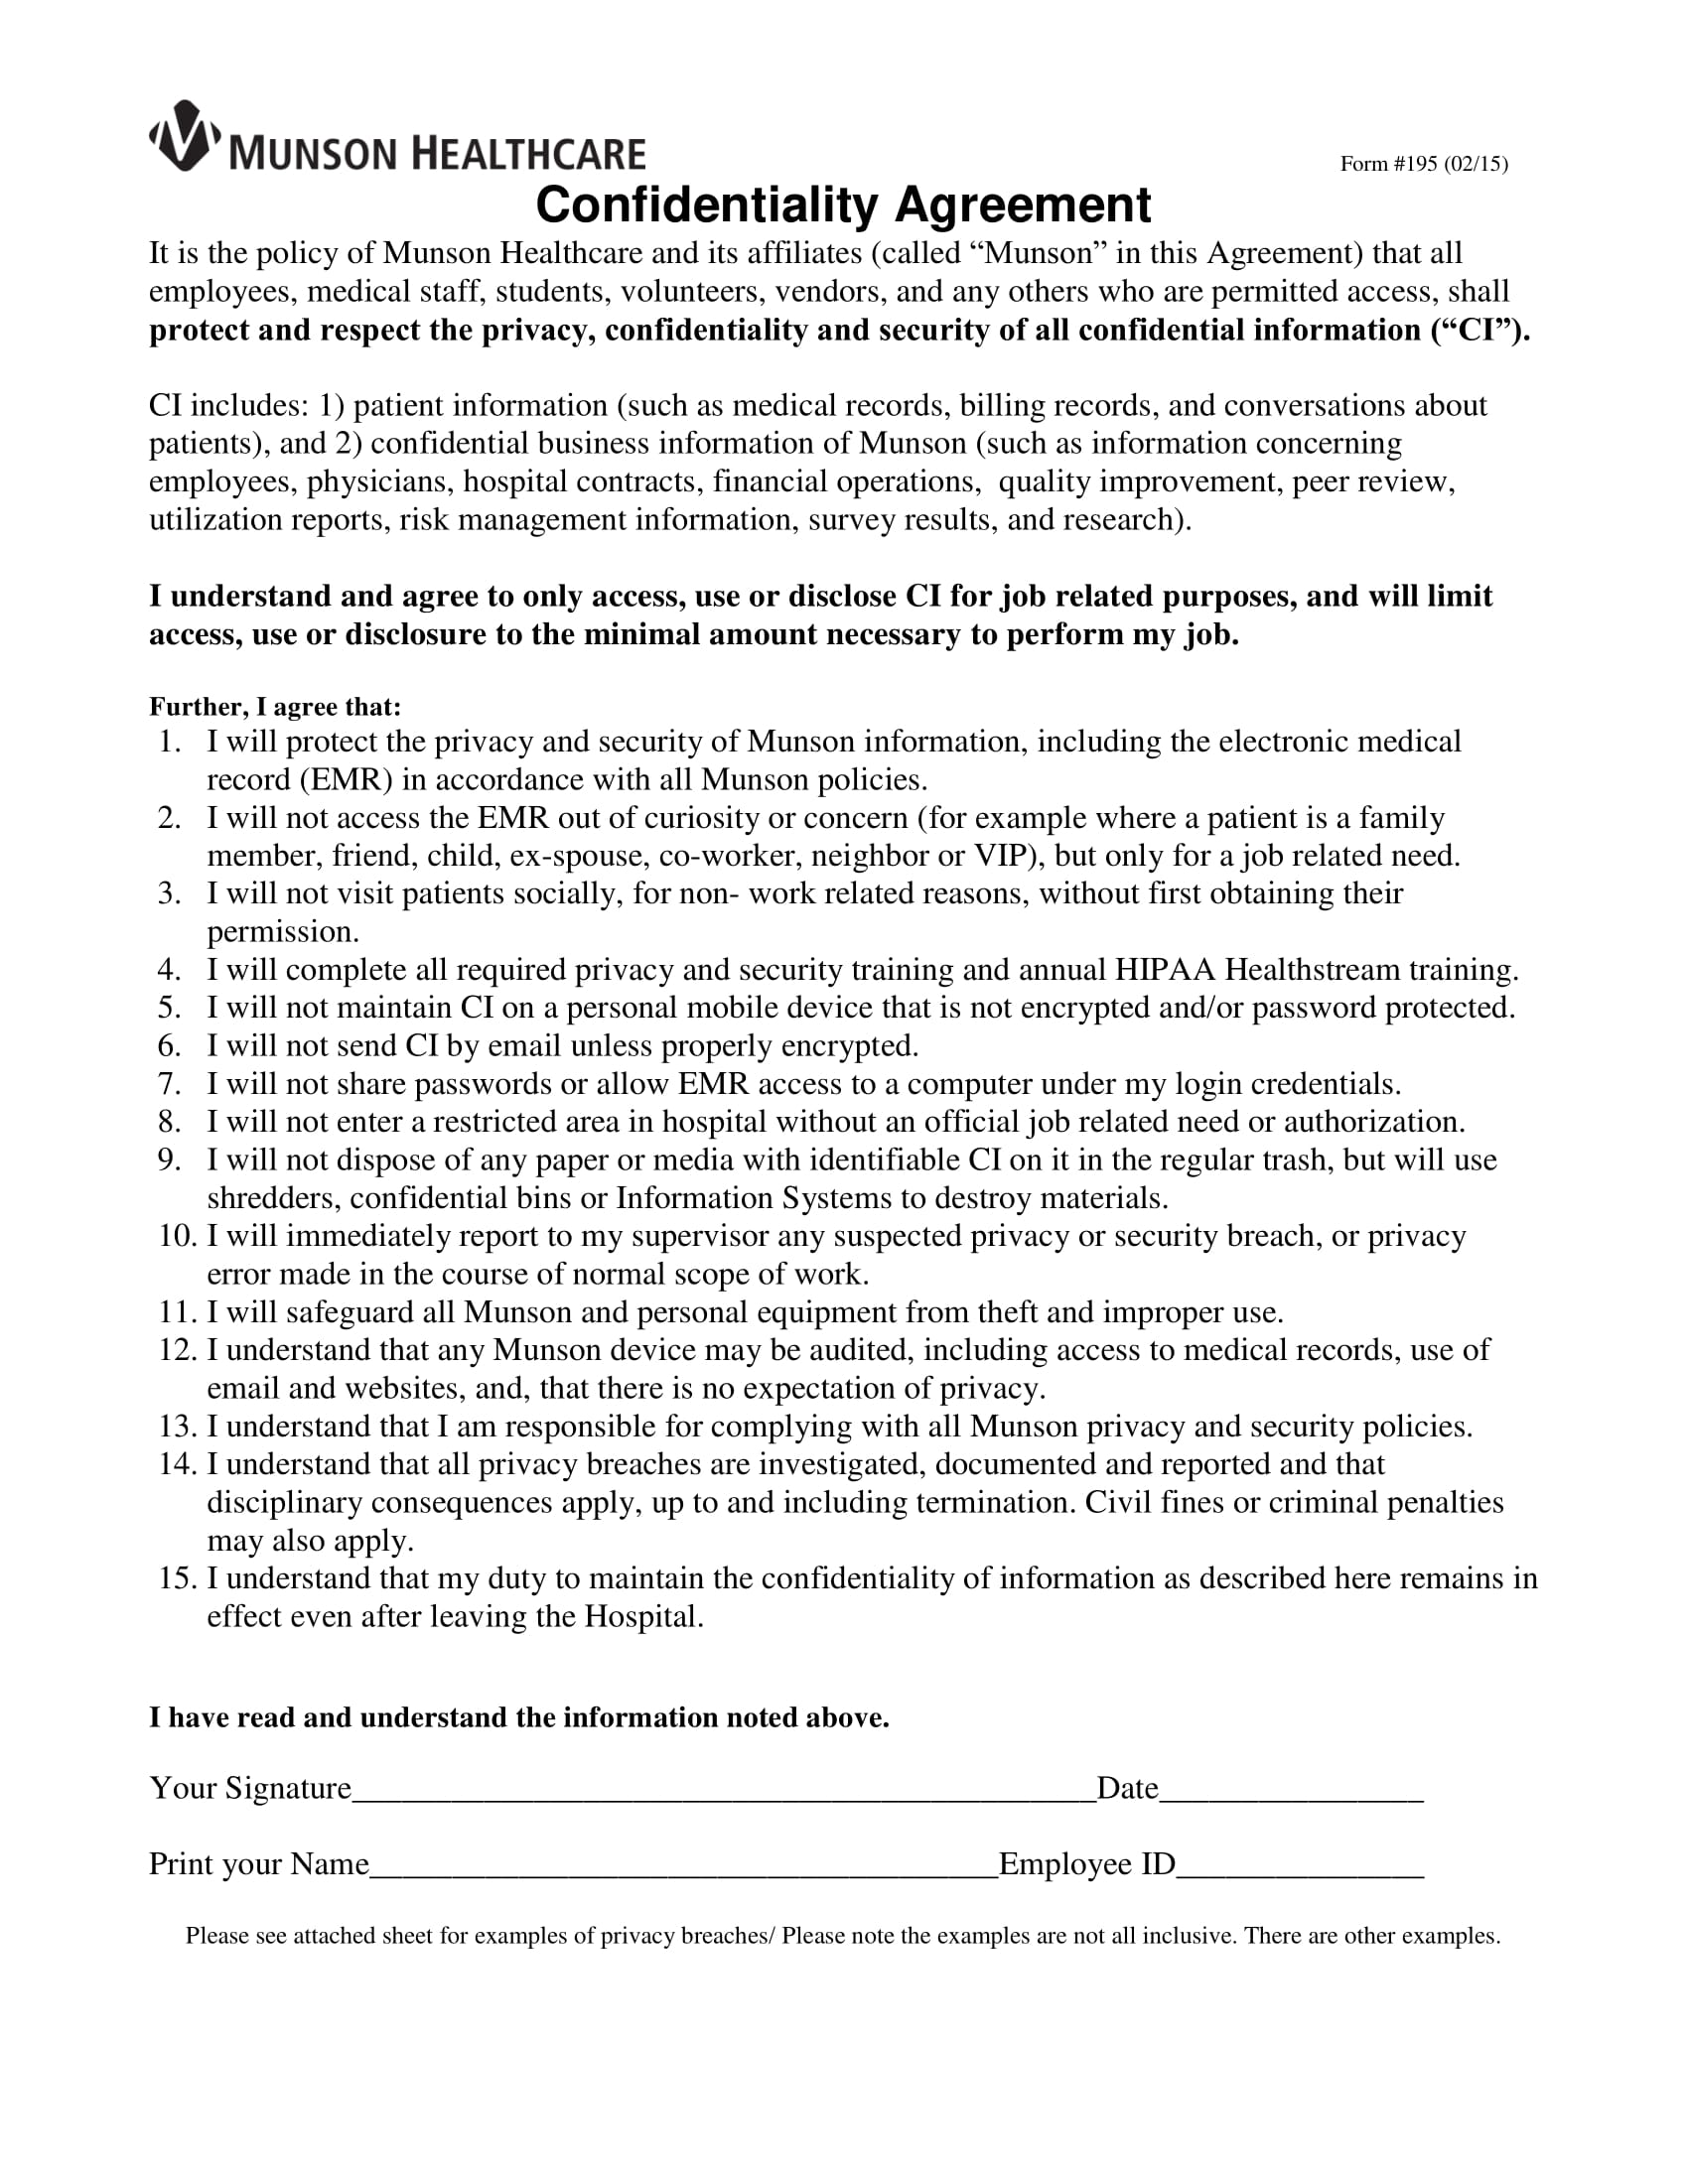 medical confidentiality agreement example